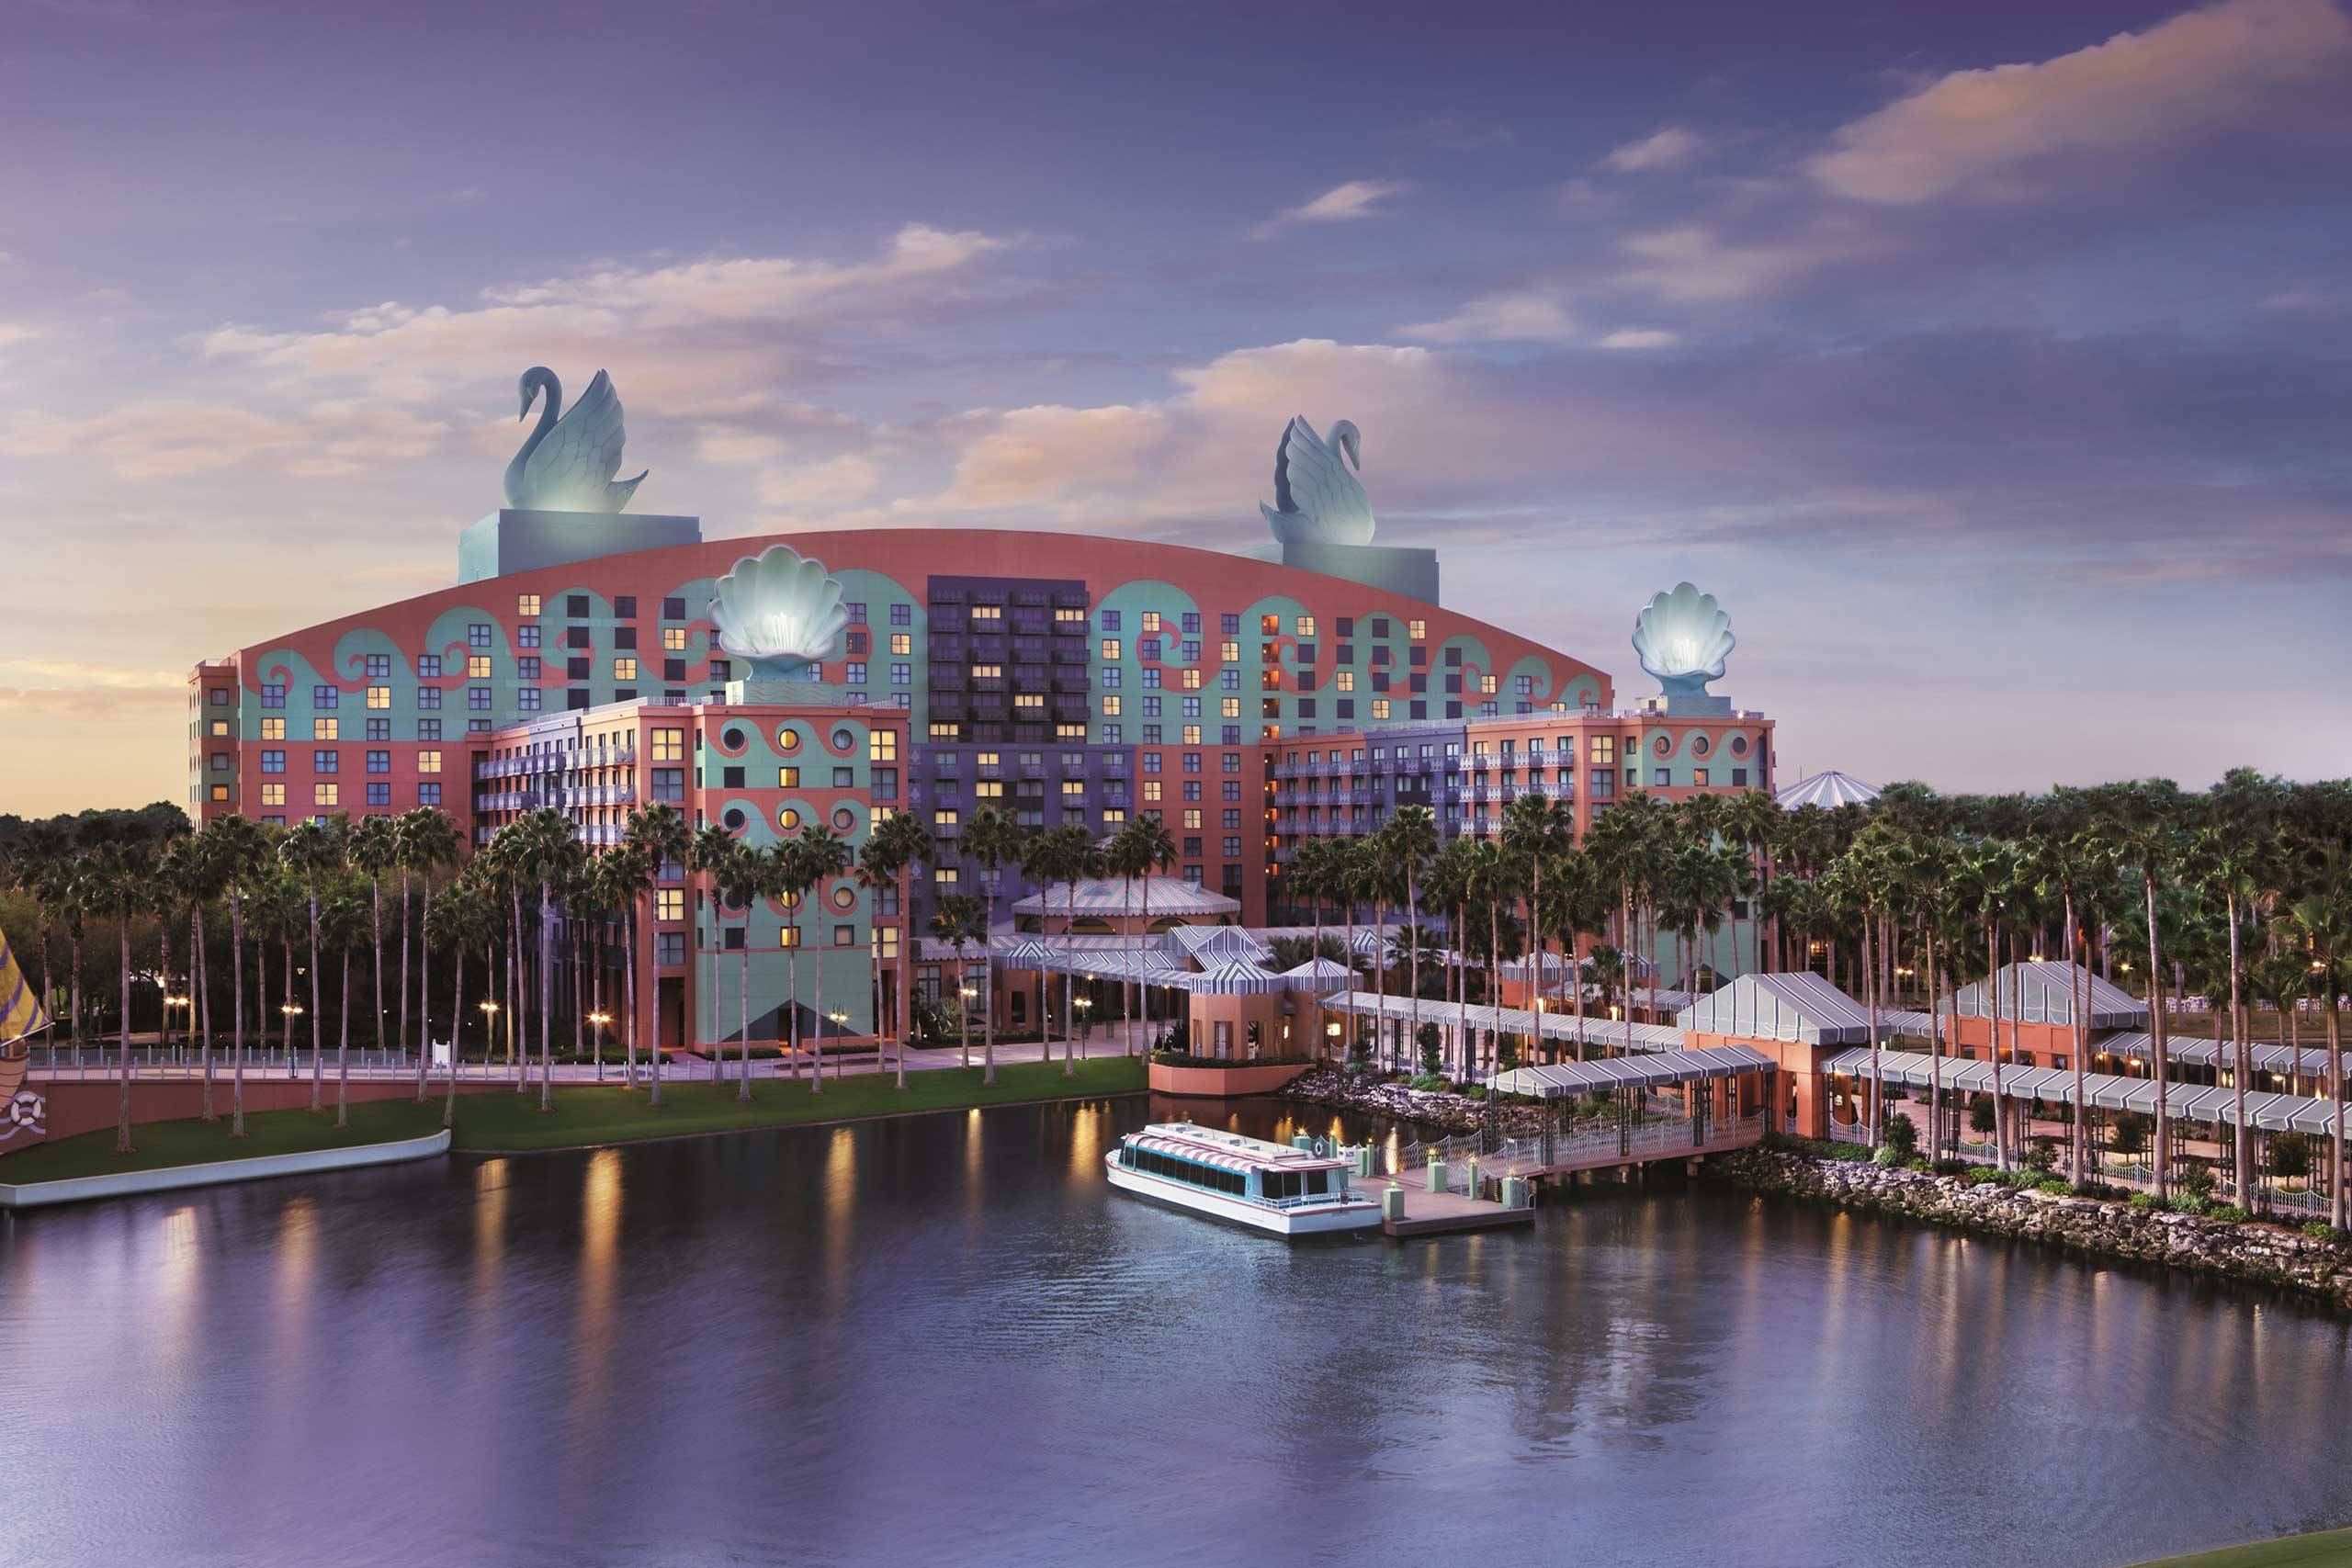 Walt Disney World Swan and Dolphin to terminate 1136 employees